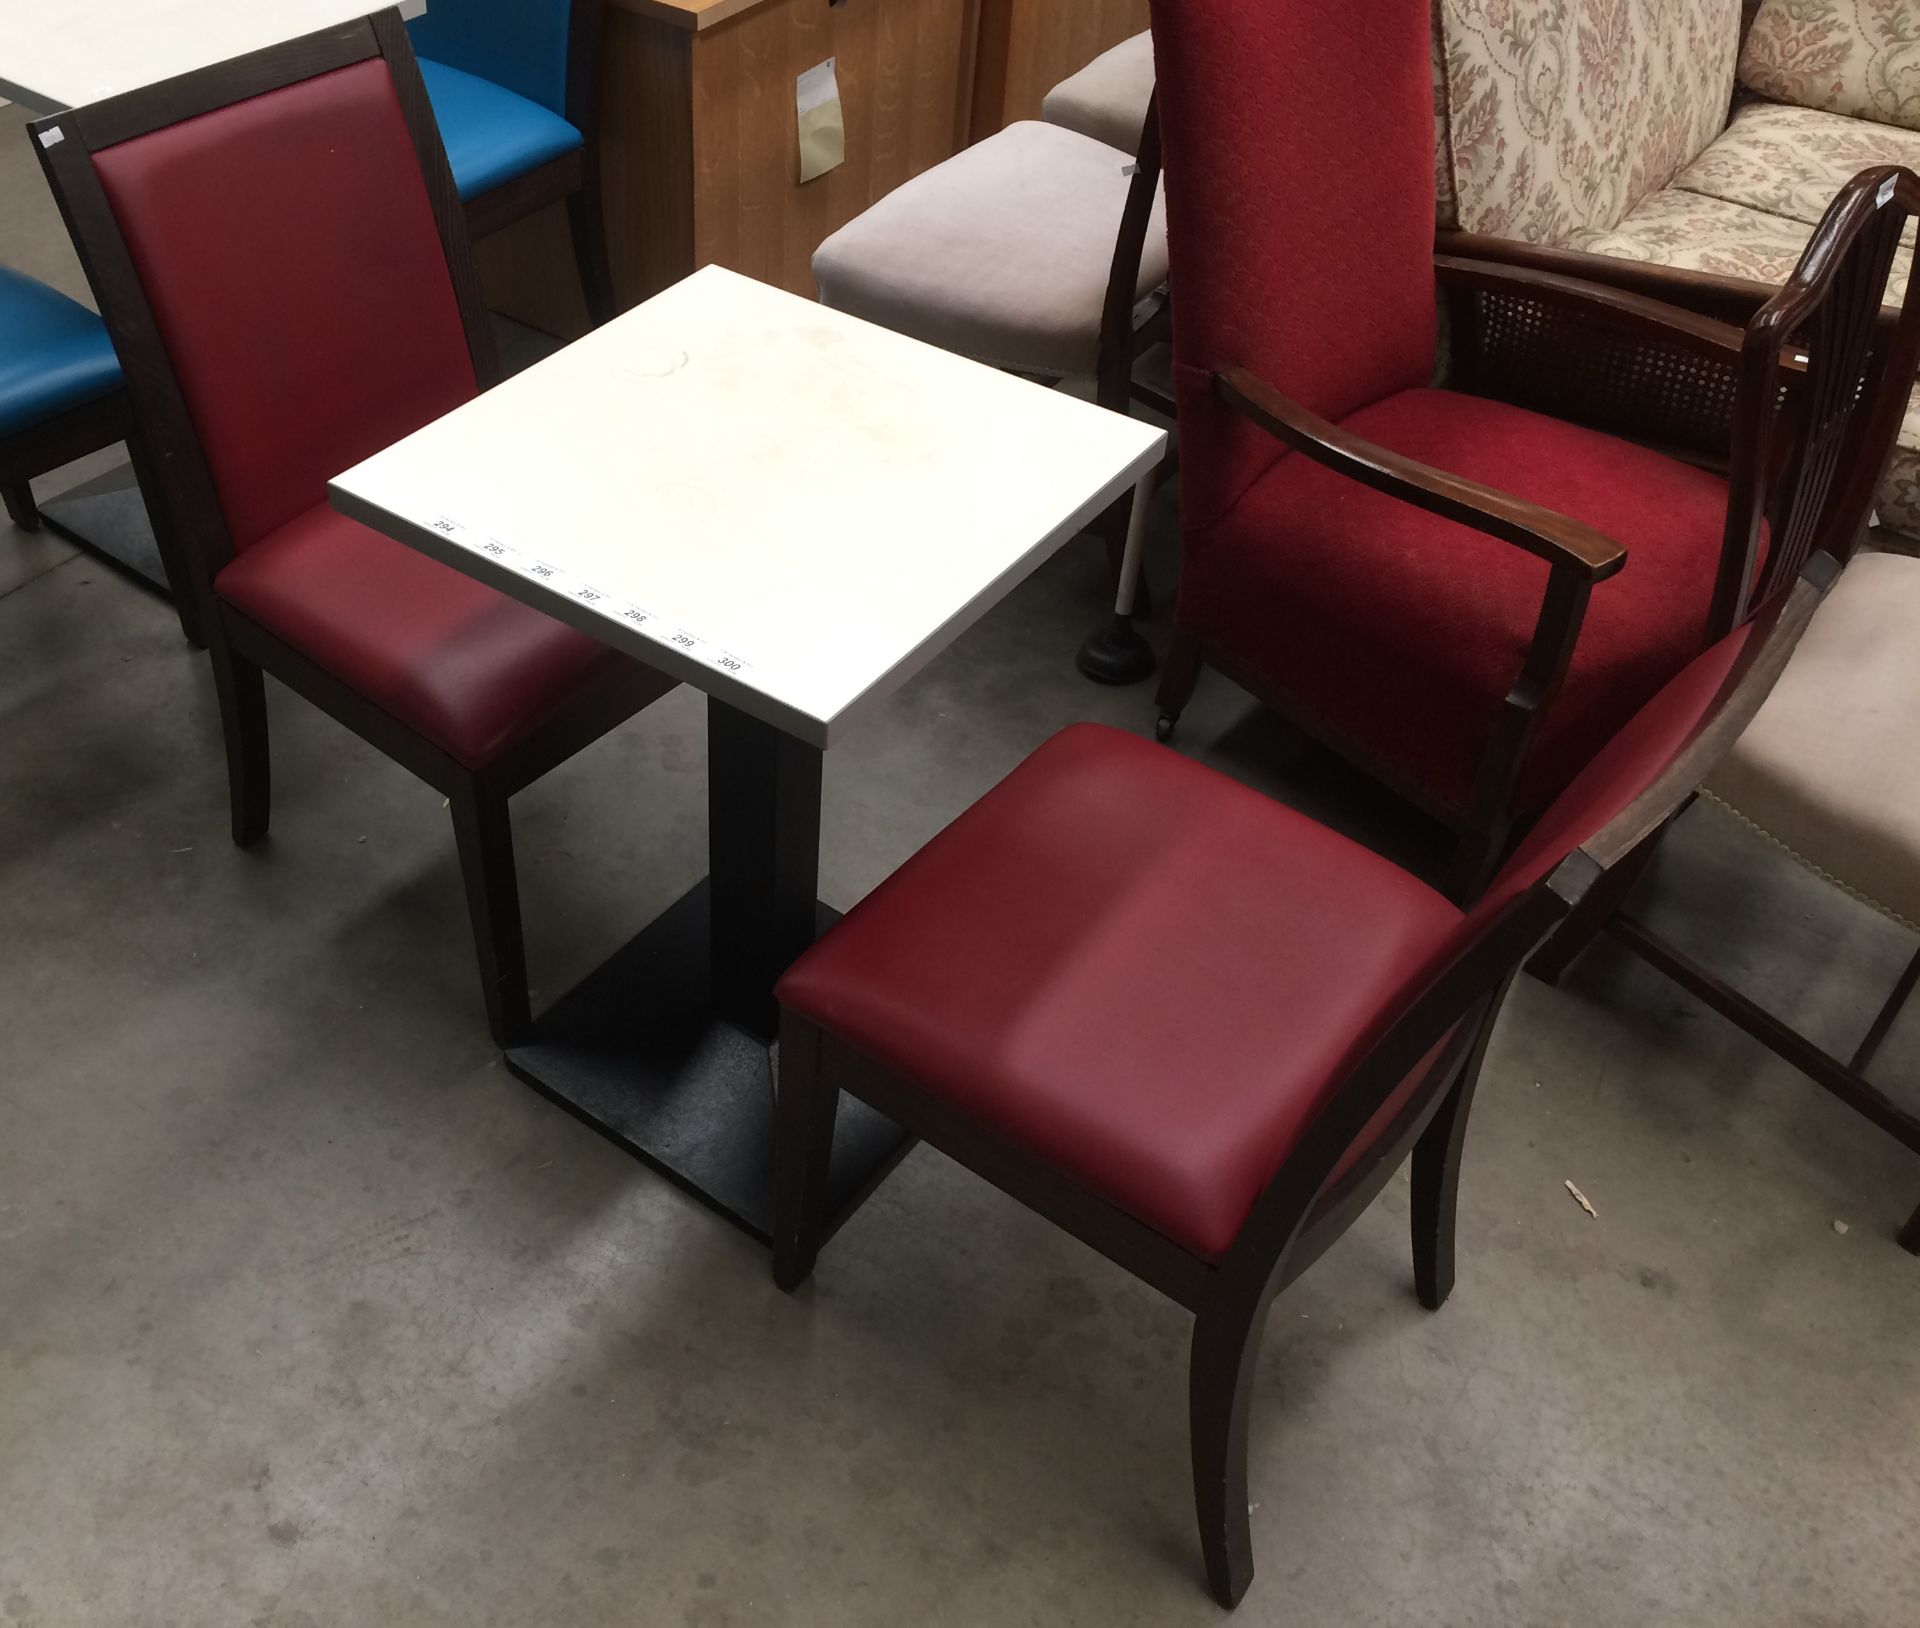 A white square cafe table 50 x 50cm on black metal base complete with 2 red vinyl upholstered